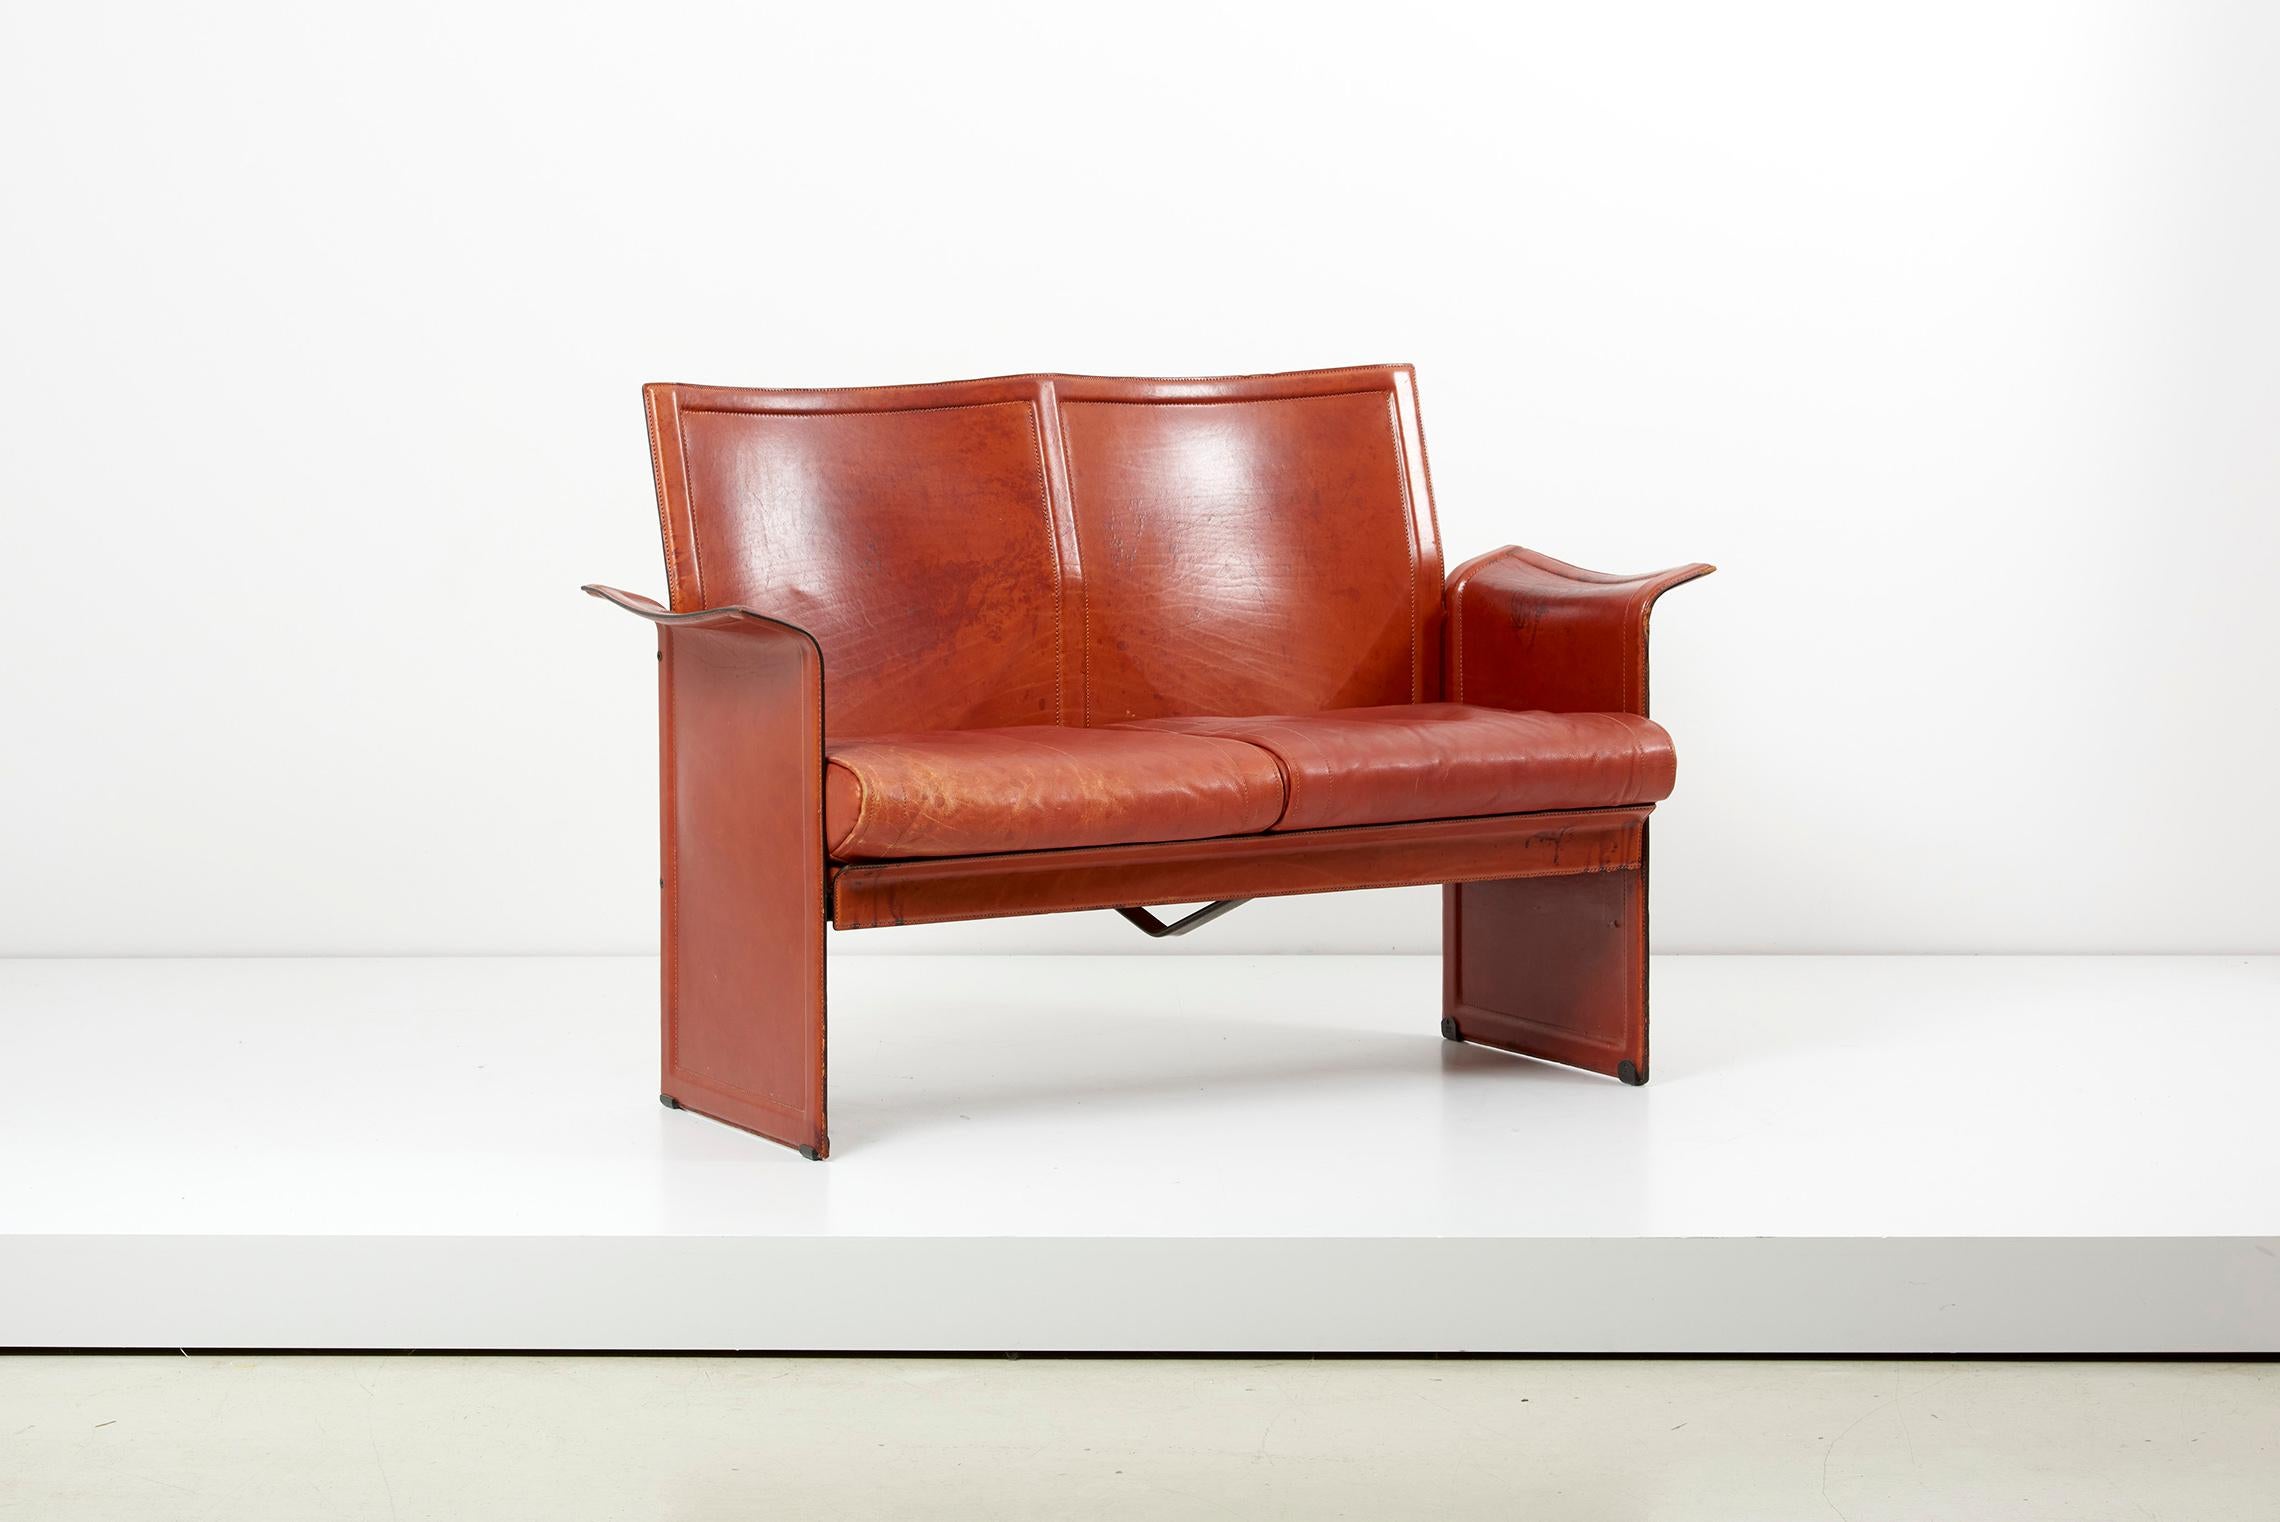 Tito Agnoli for Matteo Grassi loveseat and chair in dark cognac leather, Italy
Leather Armchair Korium Tito Agnoli for Matteo Grassi and matching loveseat with a nice authentic vintage patina.

Measures: Chair is:

Height 86 cm
Width 63 cm
Depth 55